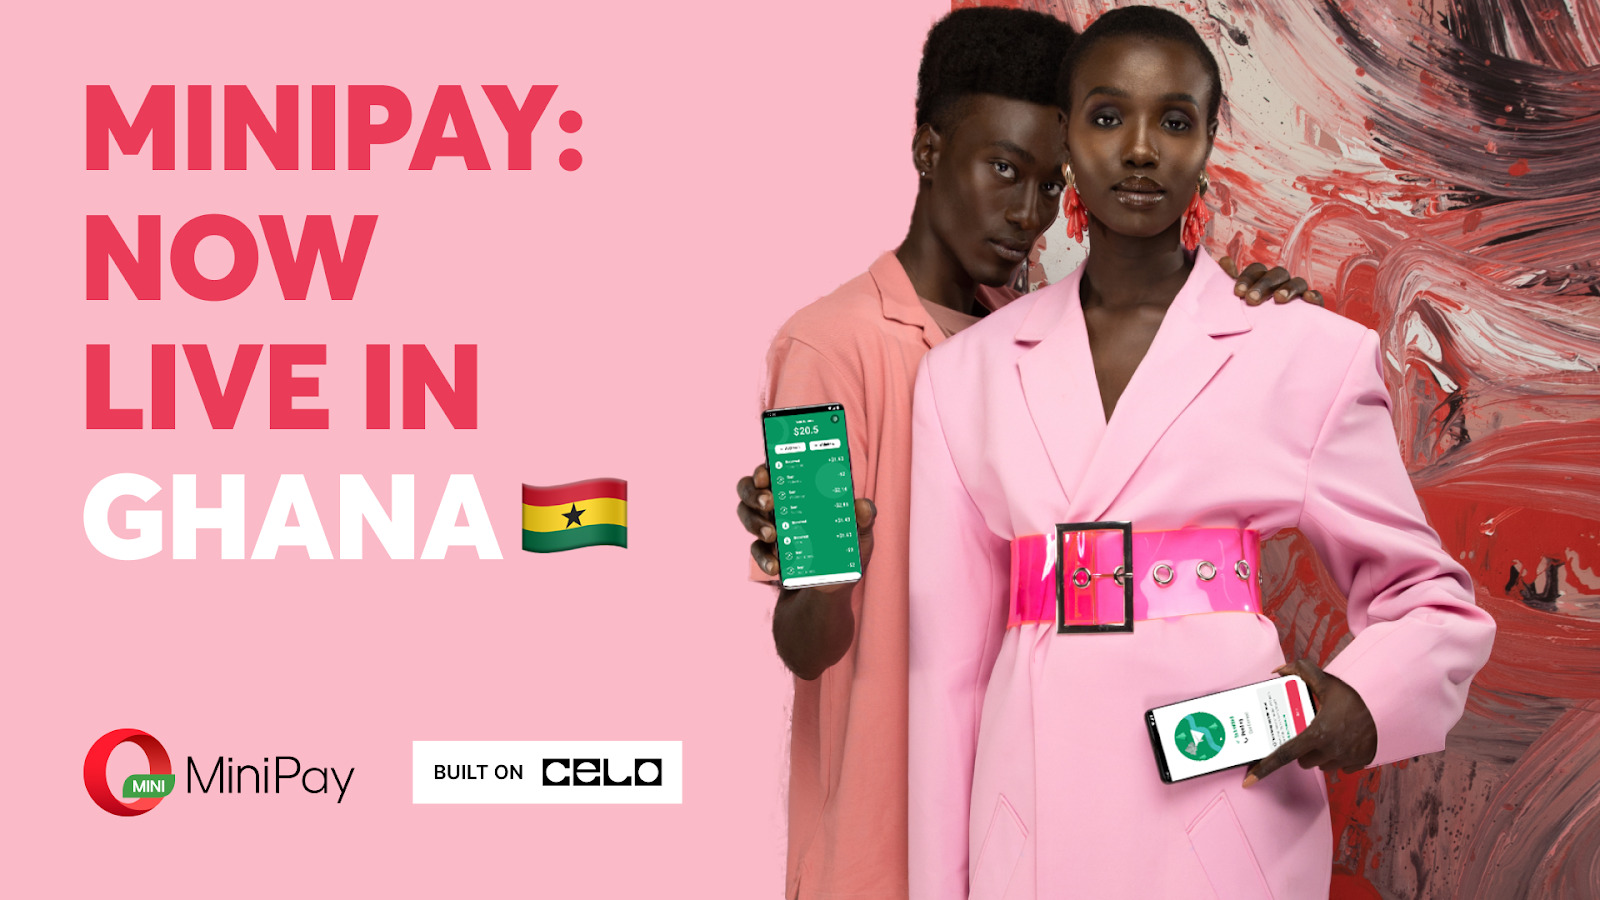 Two Ghanaians benefitting from Opera Mini's new digital wallet, MiniPay.